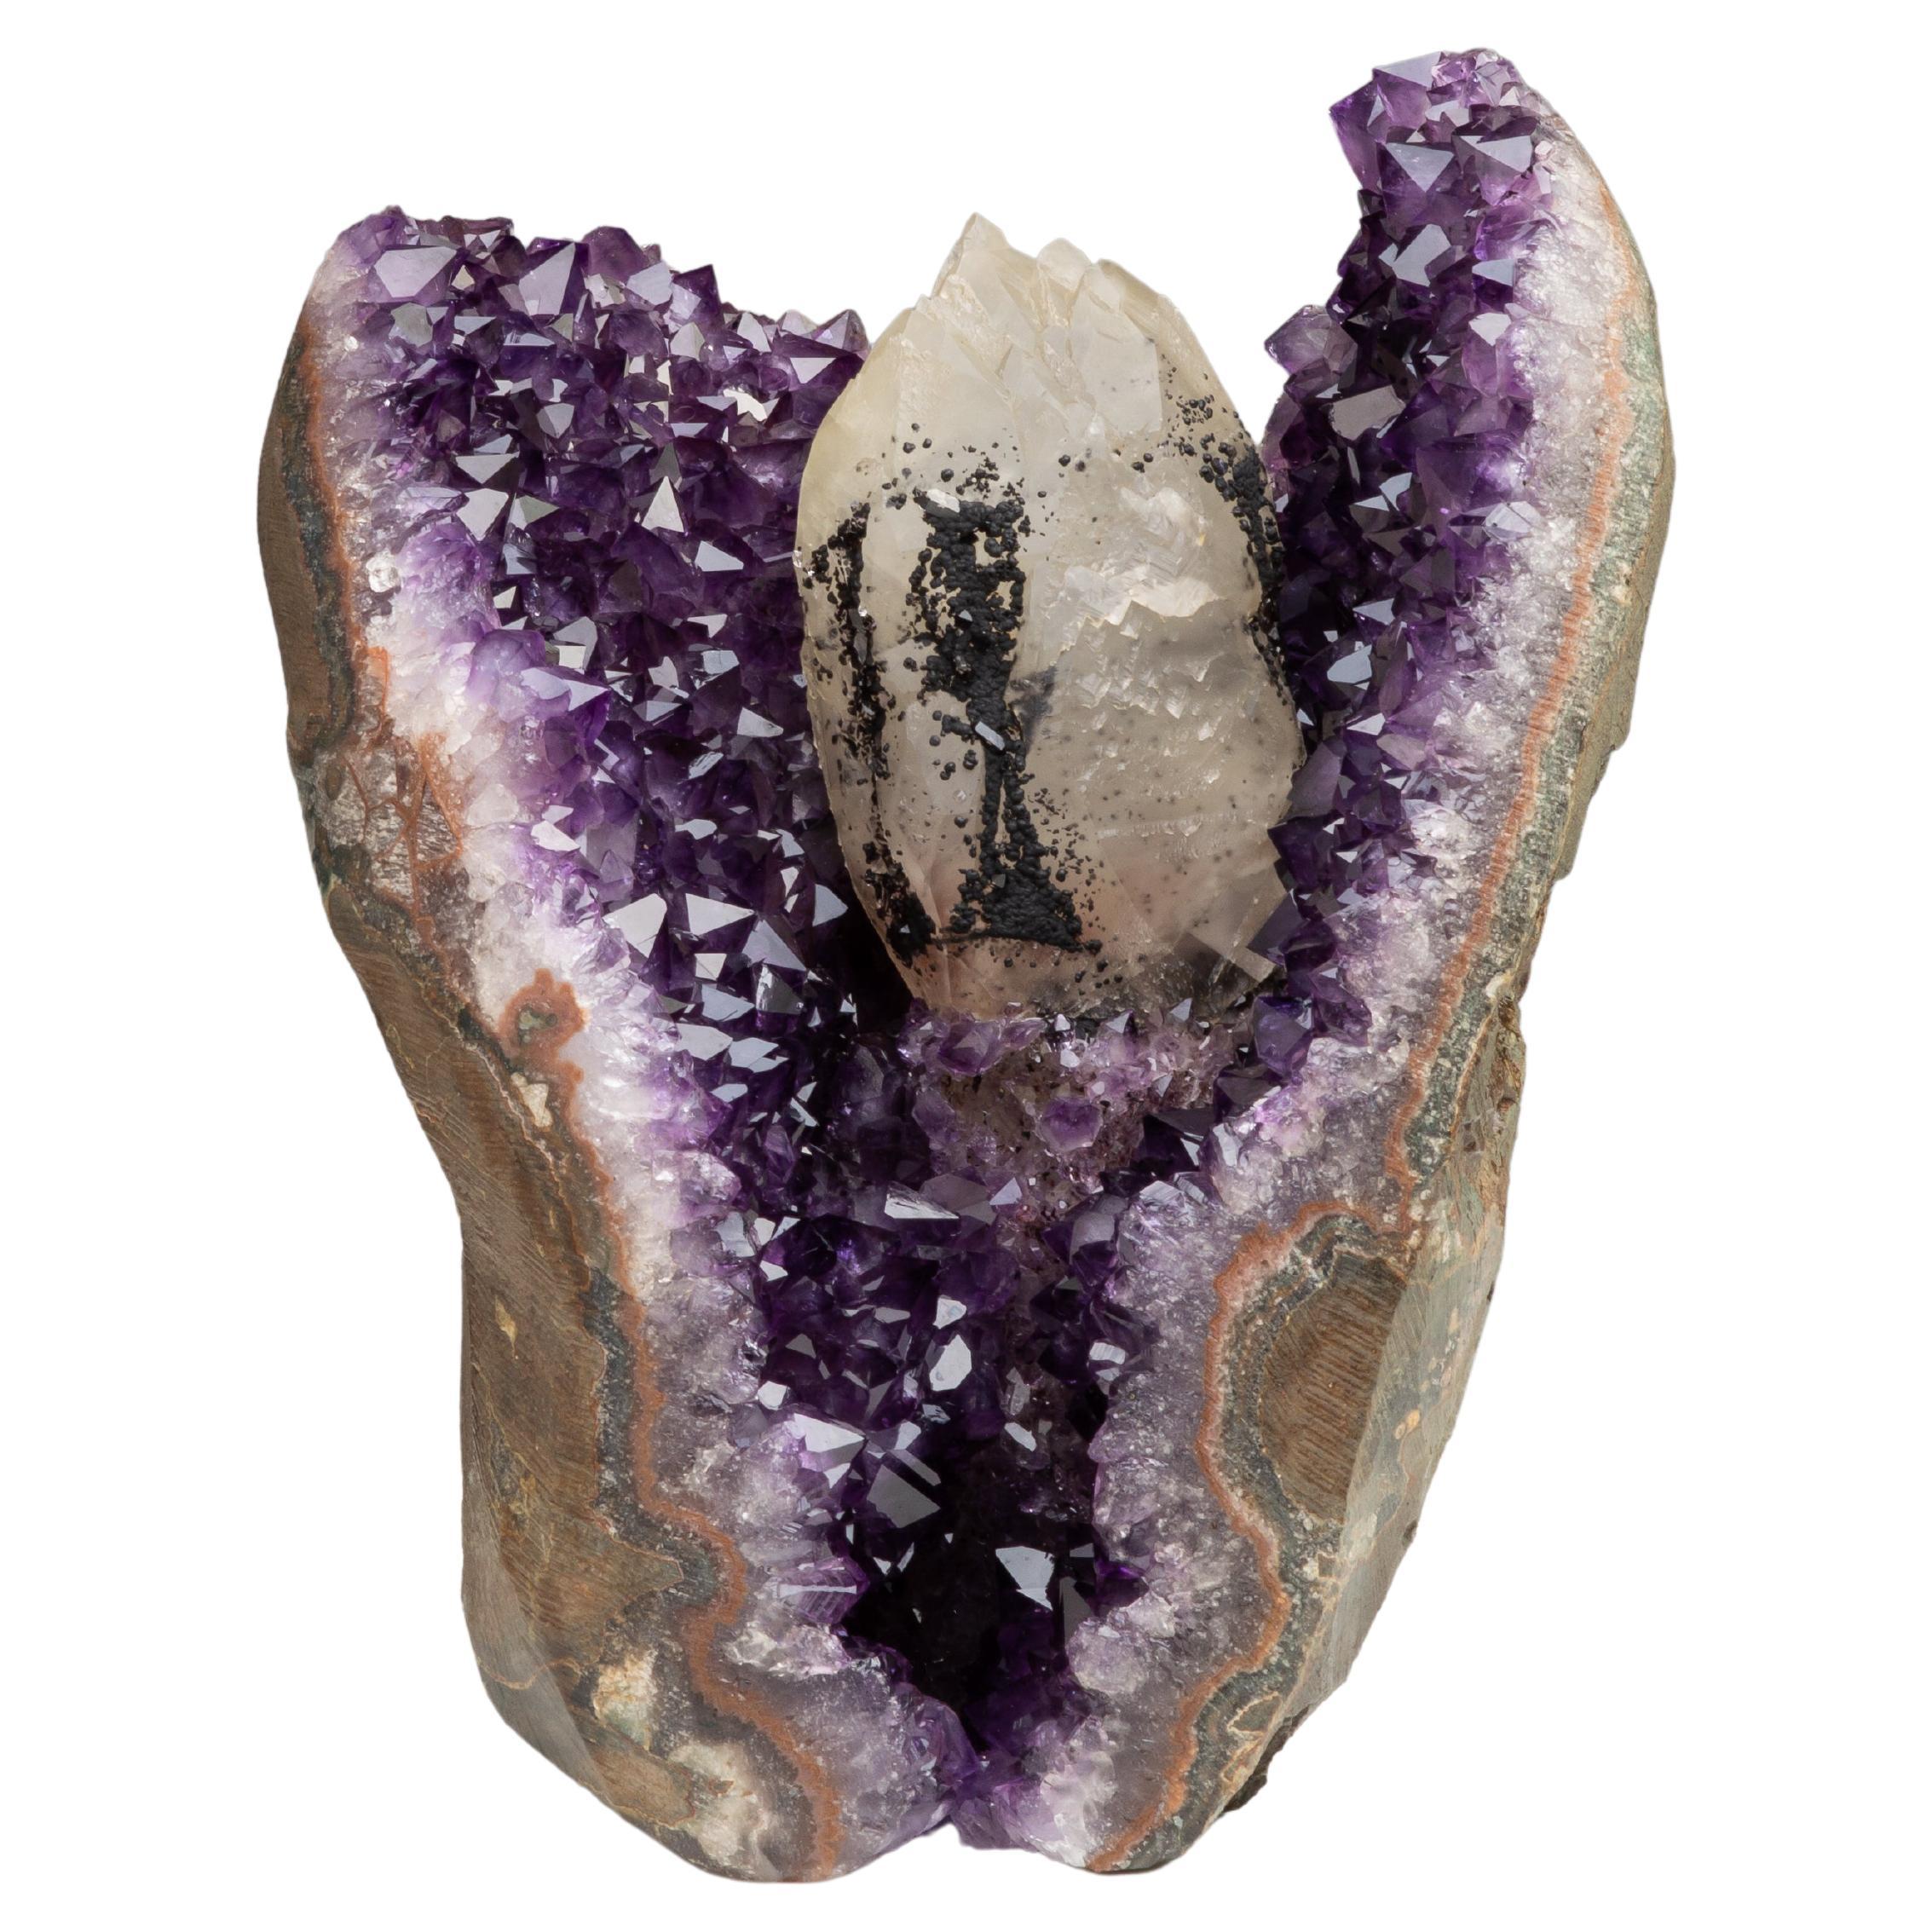 Angel Shaped Amethyst Crystals and Calcite mineral formation